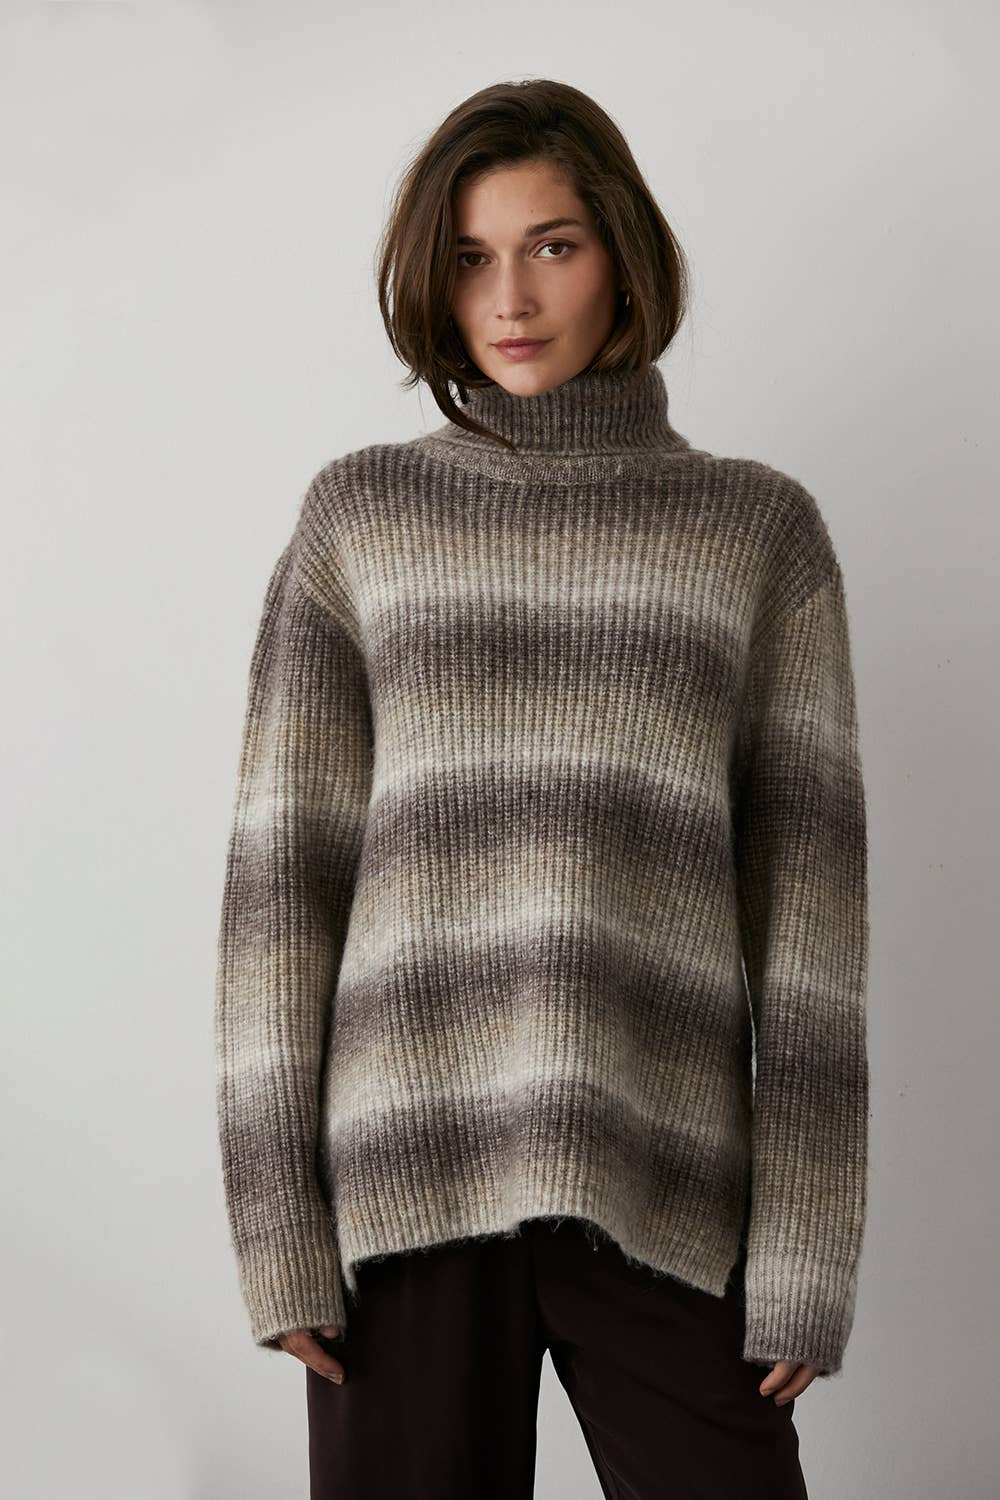 Crescent CT8698 - Ariana Multi Colored Wool-Blend Turtleneck Sweater: S / Brown - Simple Good